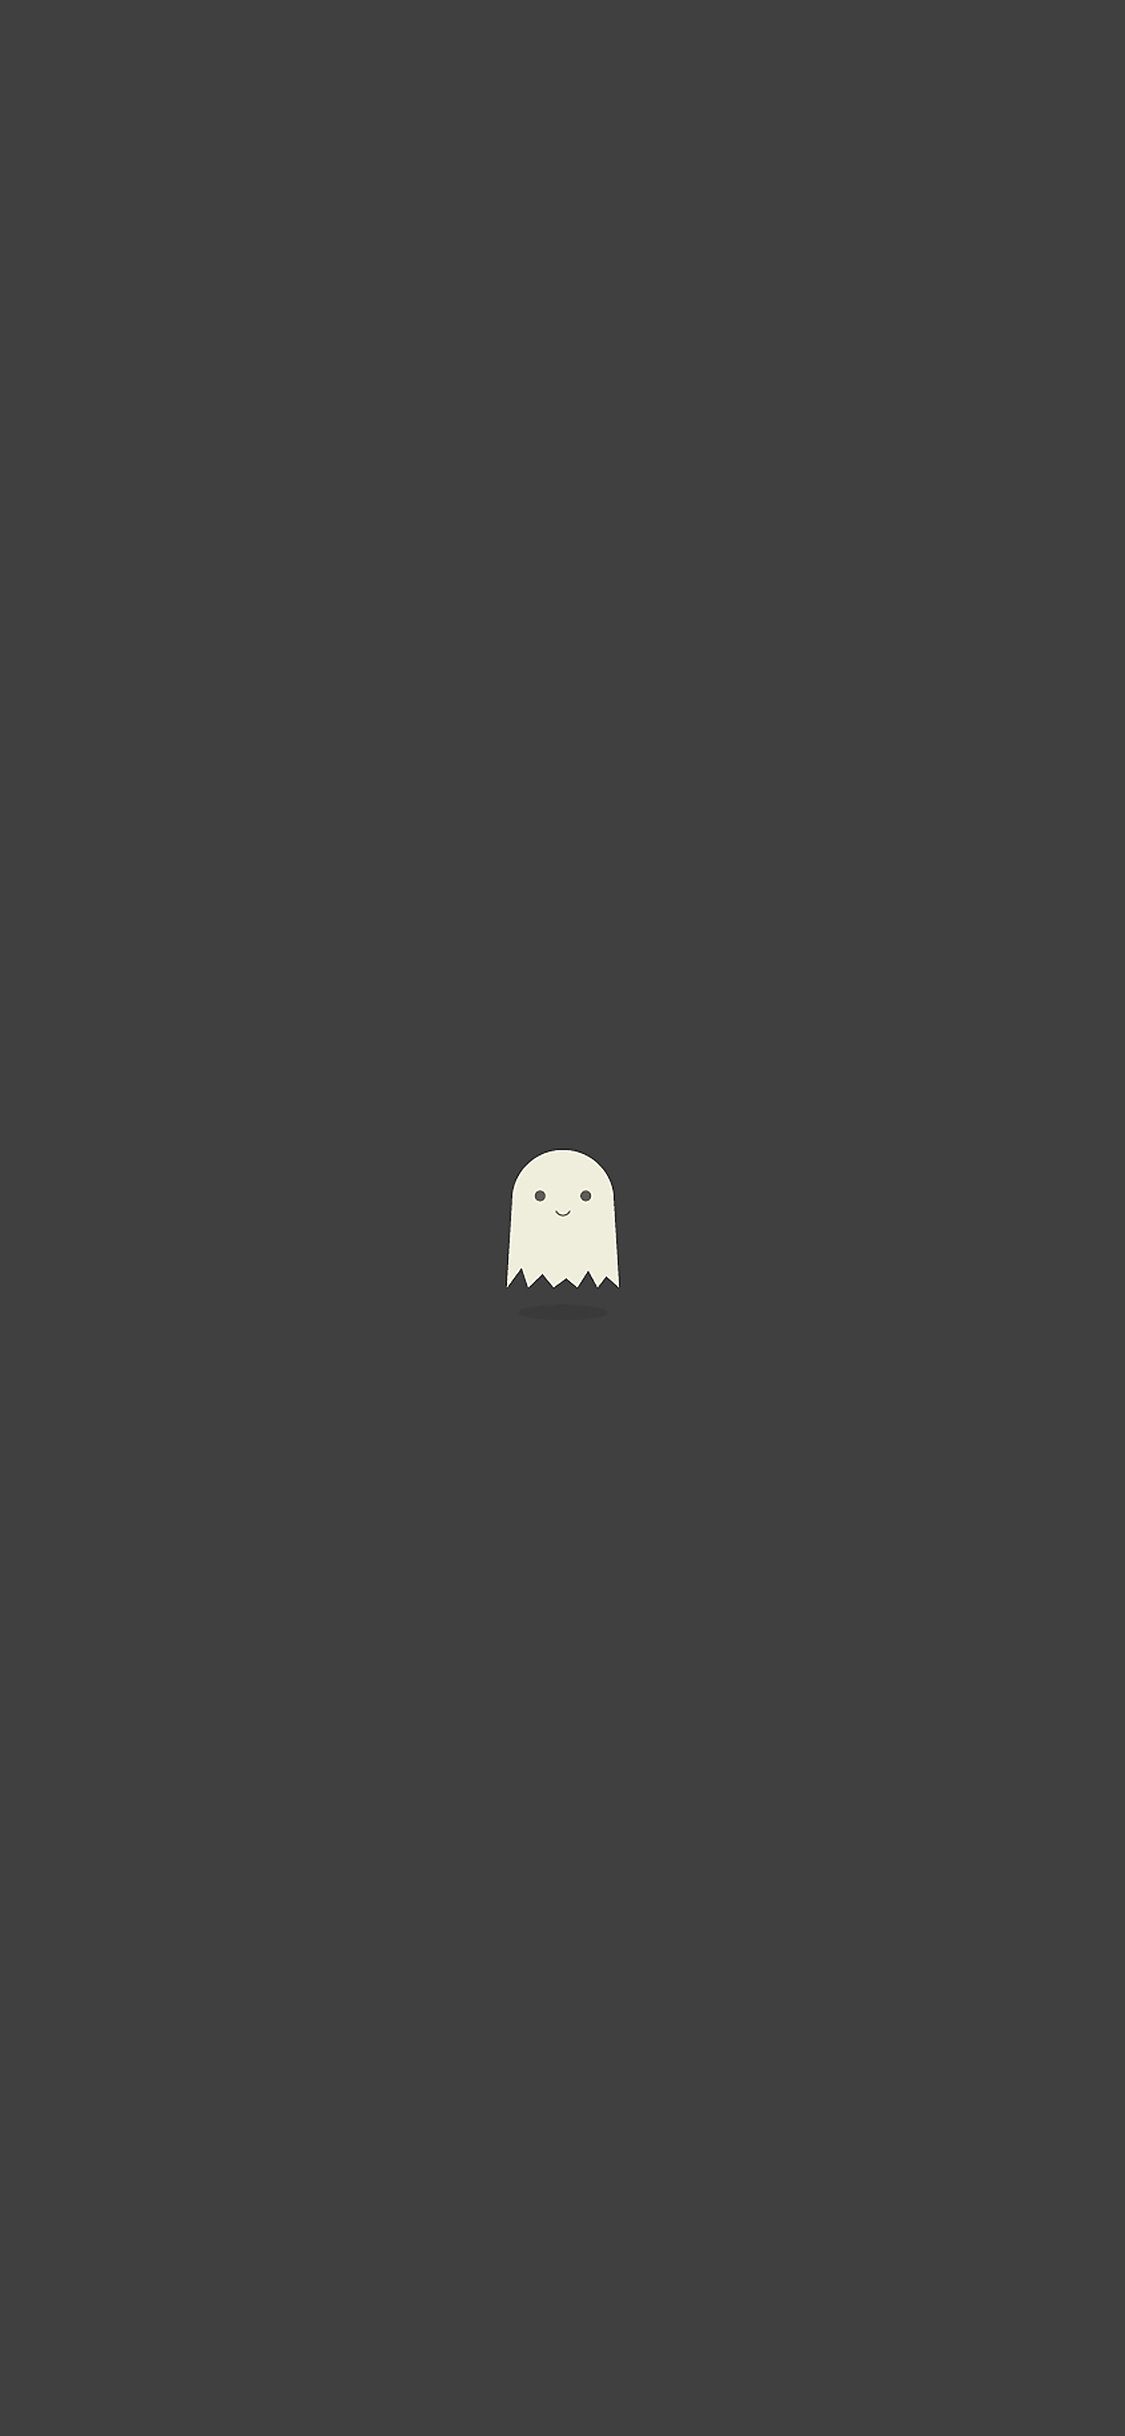 Cute Ghost by TheAWPMaster